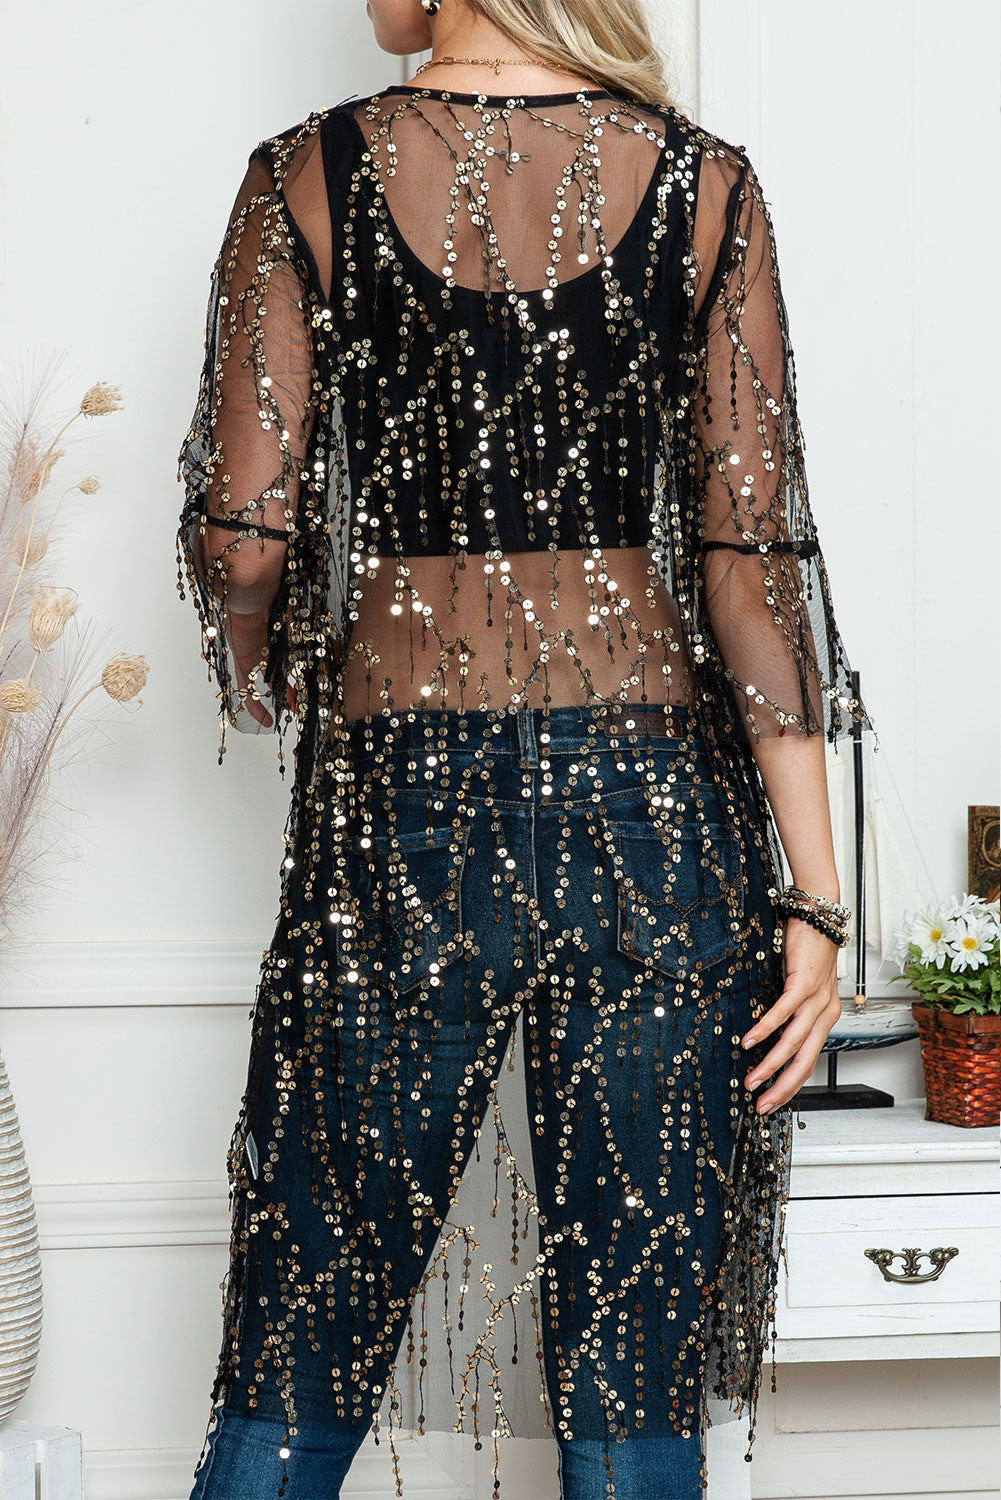 Black Sequin Sheer Casual Open Front Cover Up